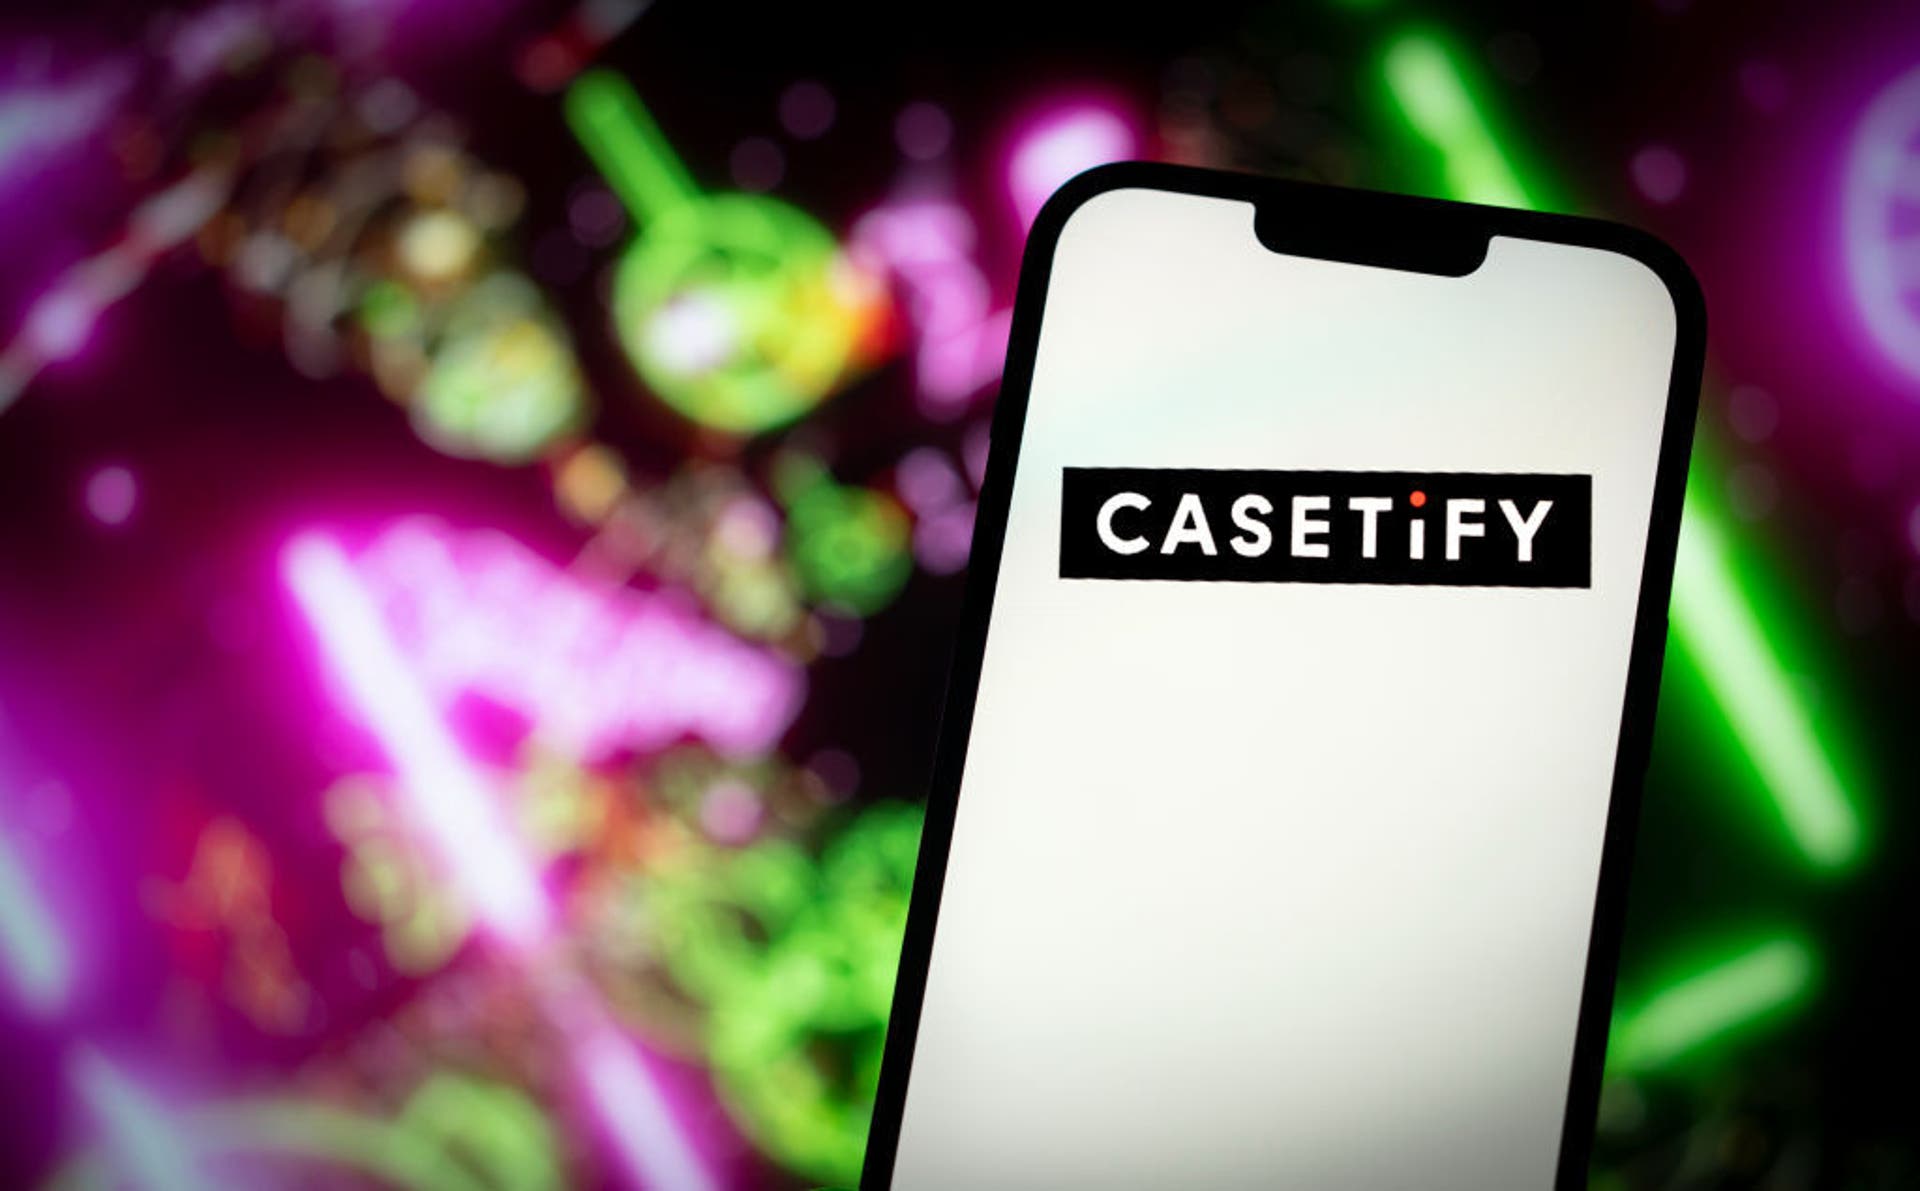  the casetify logo on a mobile phone 